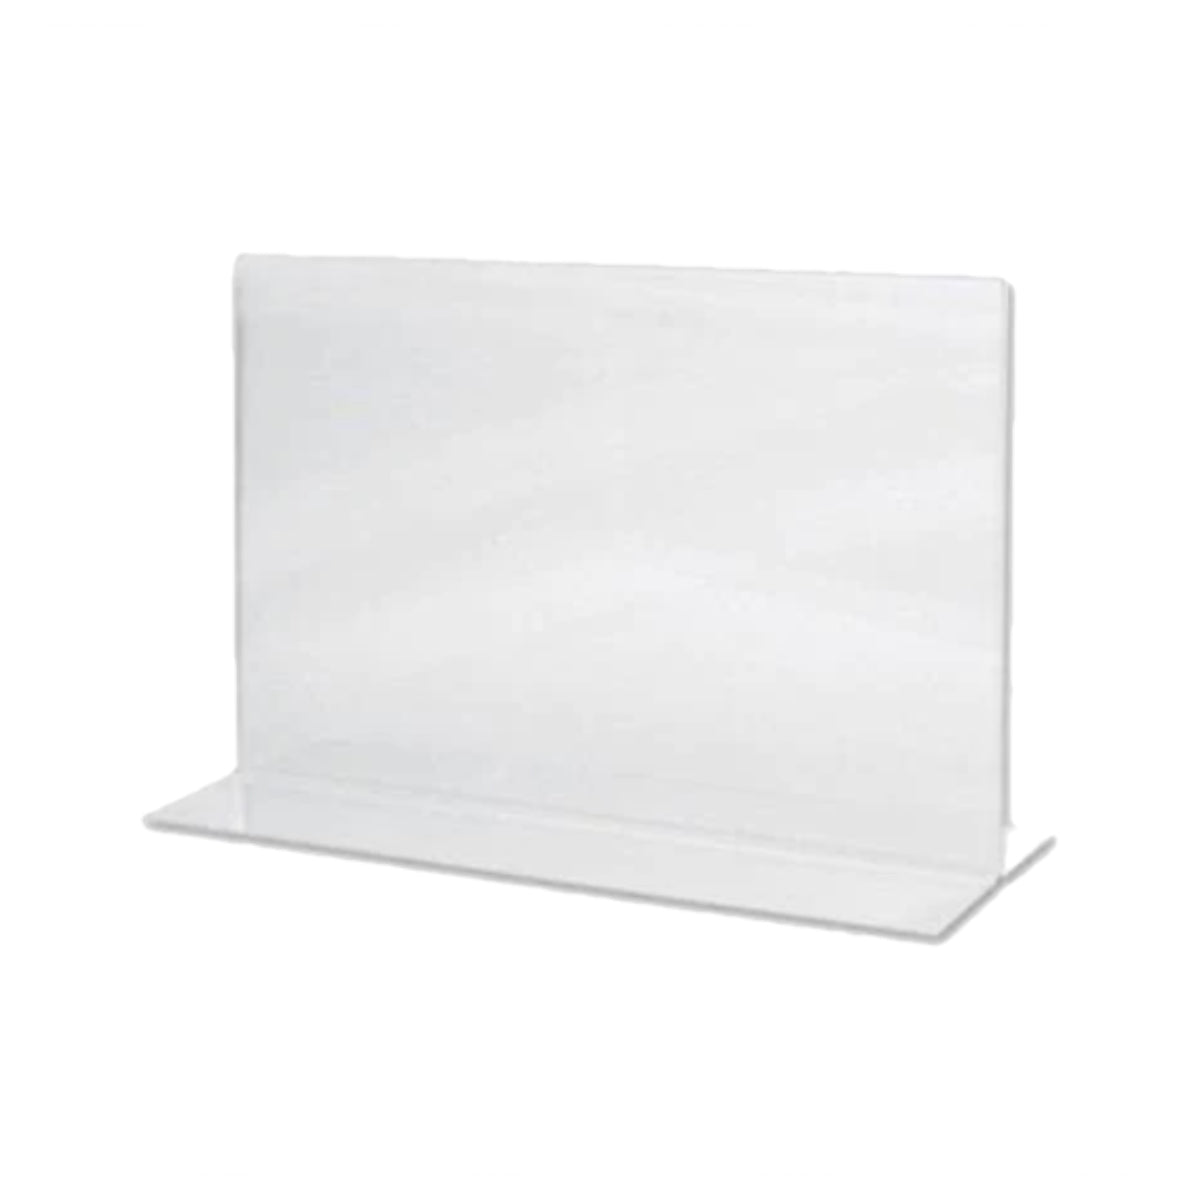 Acrylic Sign Holder 2 Sided T-Type, A4 Landscape, 297 x 210 mm